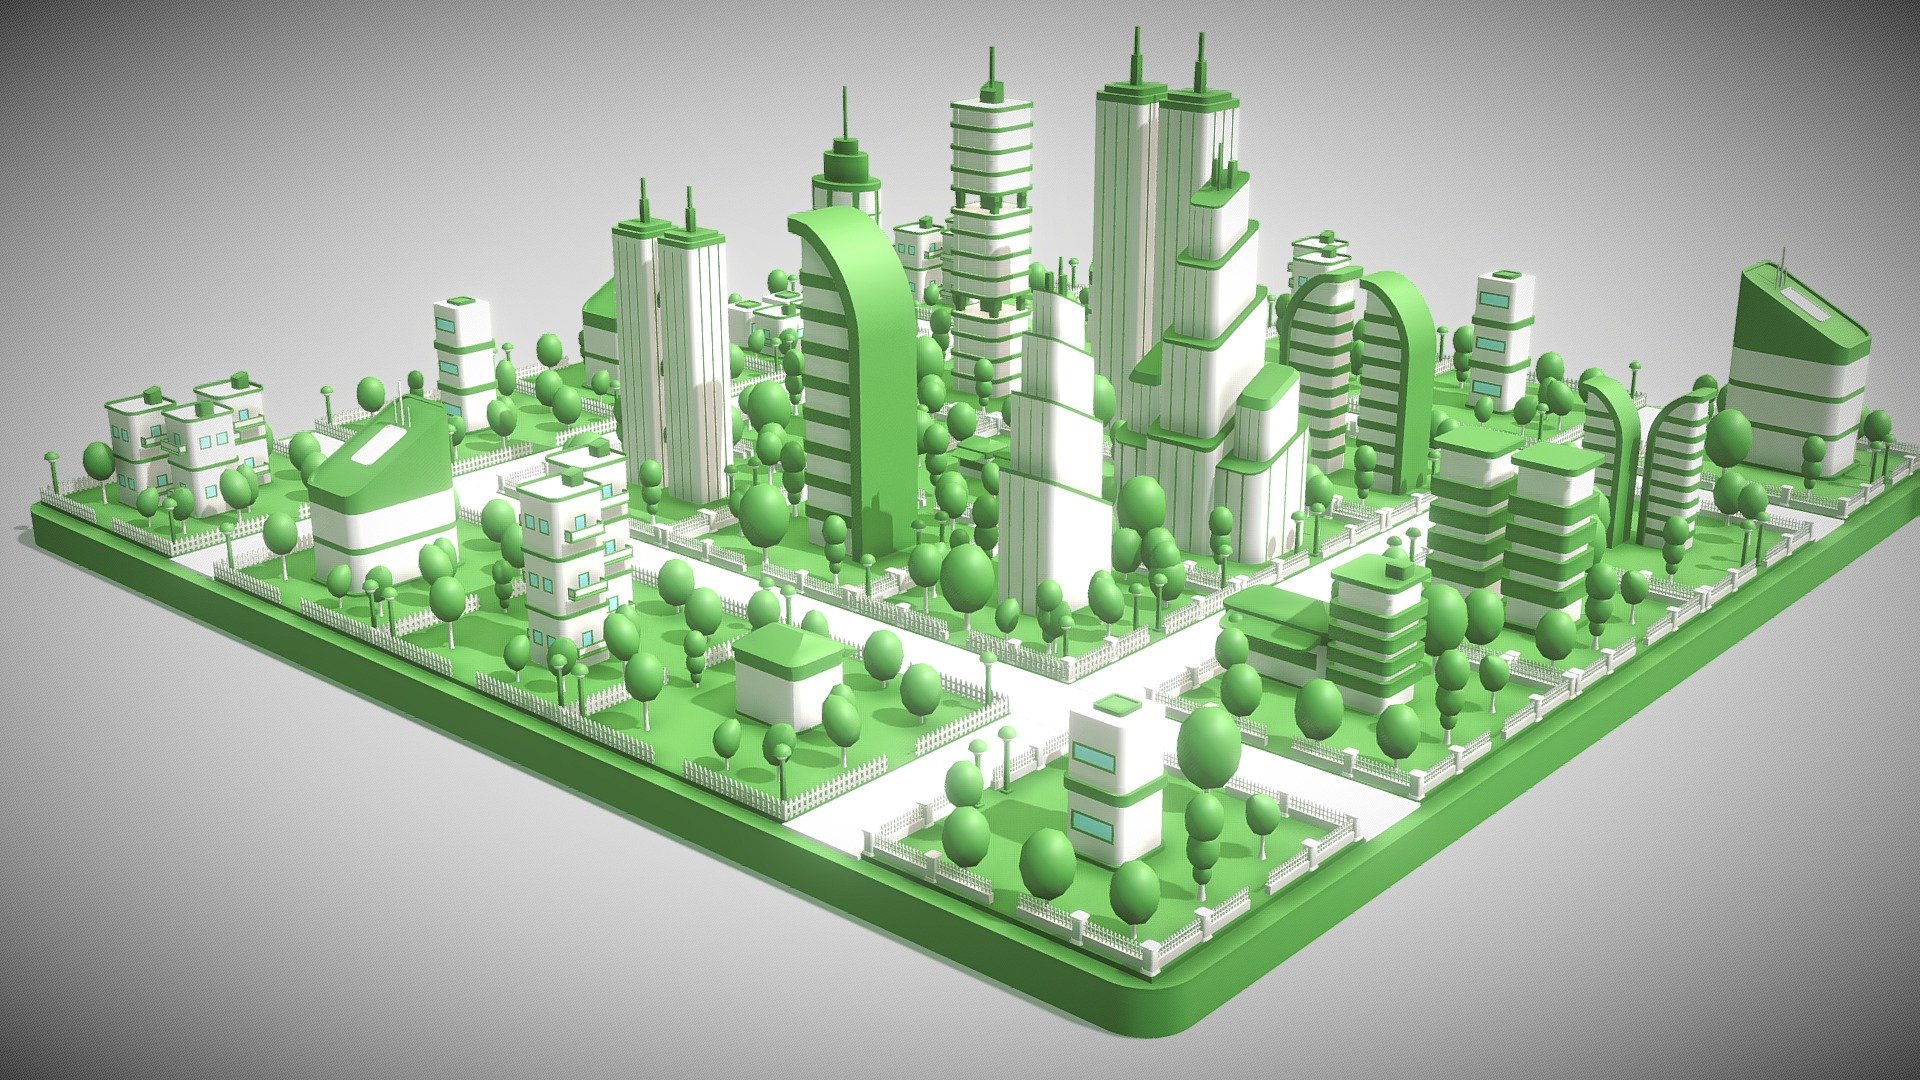 Check out finished version of the model!

I made this mini city pack for the mobile game and decided to share. The pack is currently in development im planning to enlarge the amount of buildings and environmental props. I exported fbx files for each individual objects but I have Sketchfab free plan, i cant upload them seperated. 
All the assets are tested in Unity, you can use them in your game projects without permission.
(Keep in mind: Models are not UV Unwrapped.)

For any questions feel free to contact me: mertkilictab@gmail.com - Cartoon Low Poly City (Mini Pack) - Download Free 3D model by mertkilic 3d model